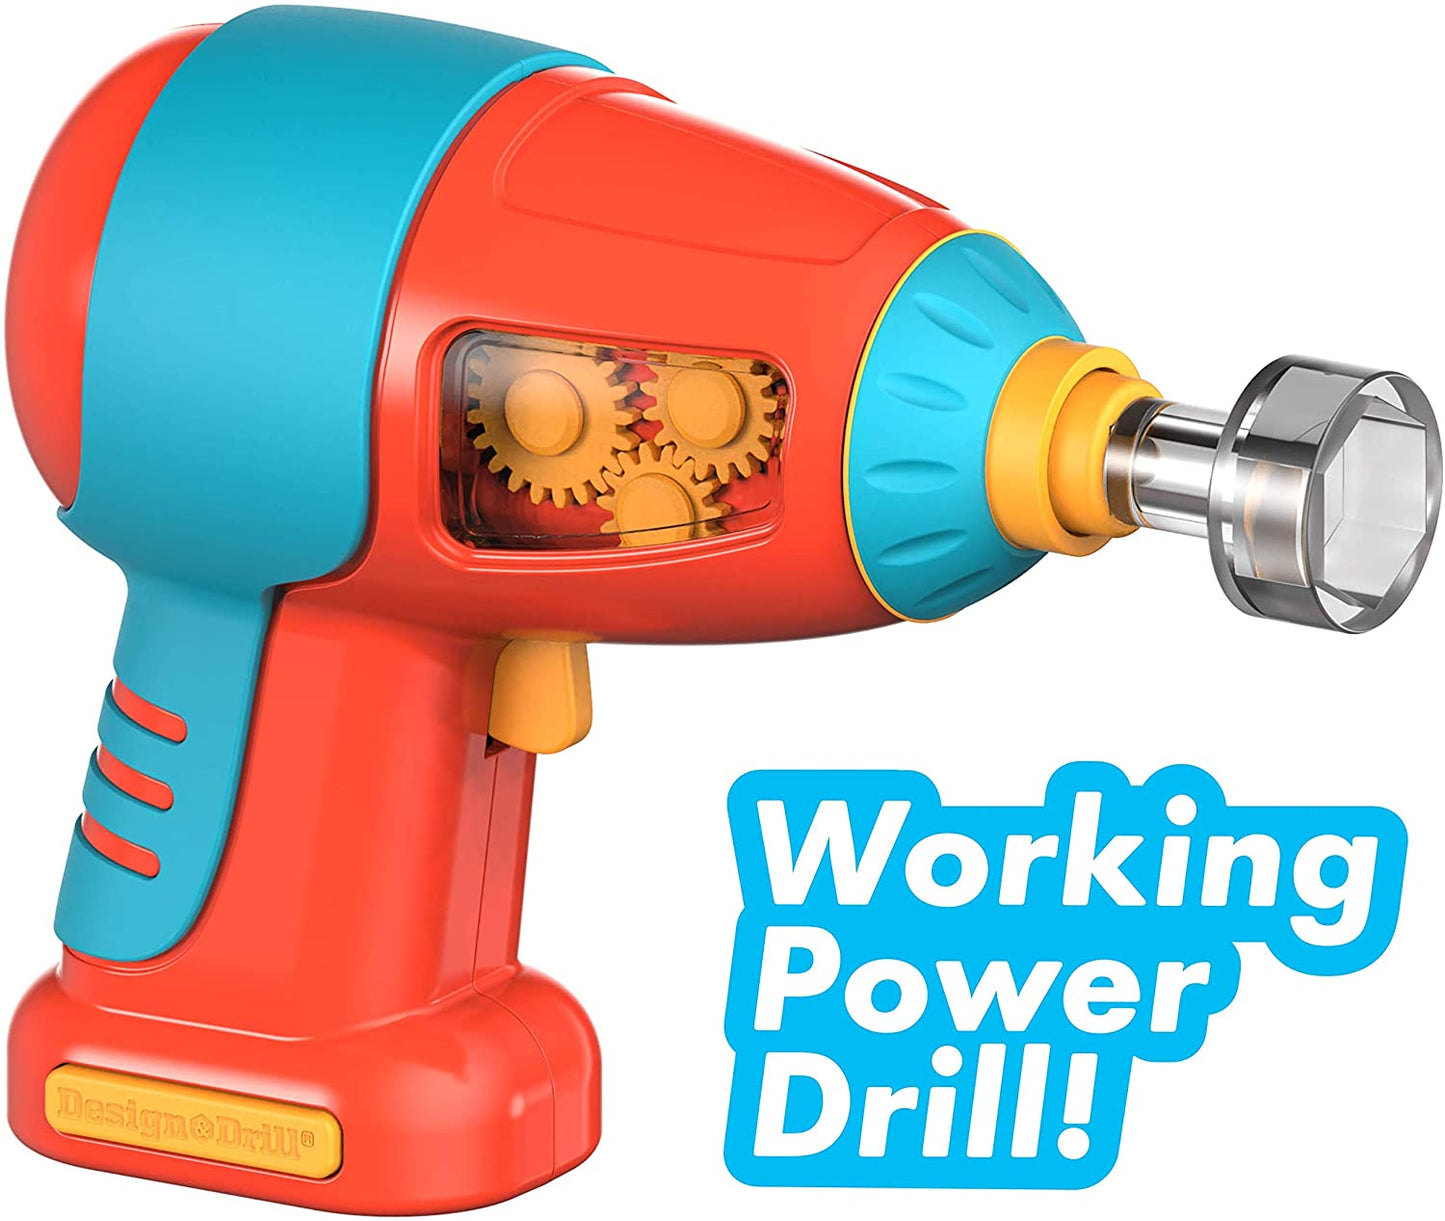 design & drill bolt buddies rocket learning simple construction engineering building fine motor skills tools real working kid safe drill astronaut puppy blast off imagination construction STEM ages 3+